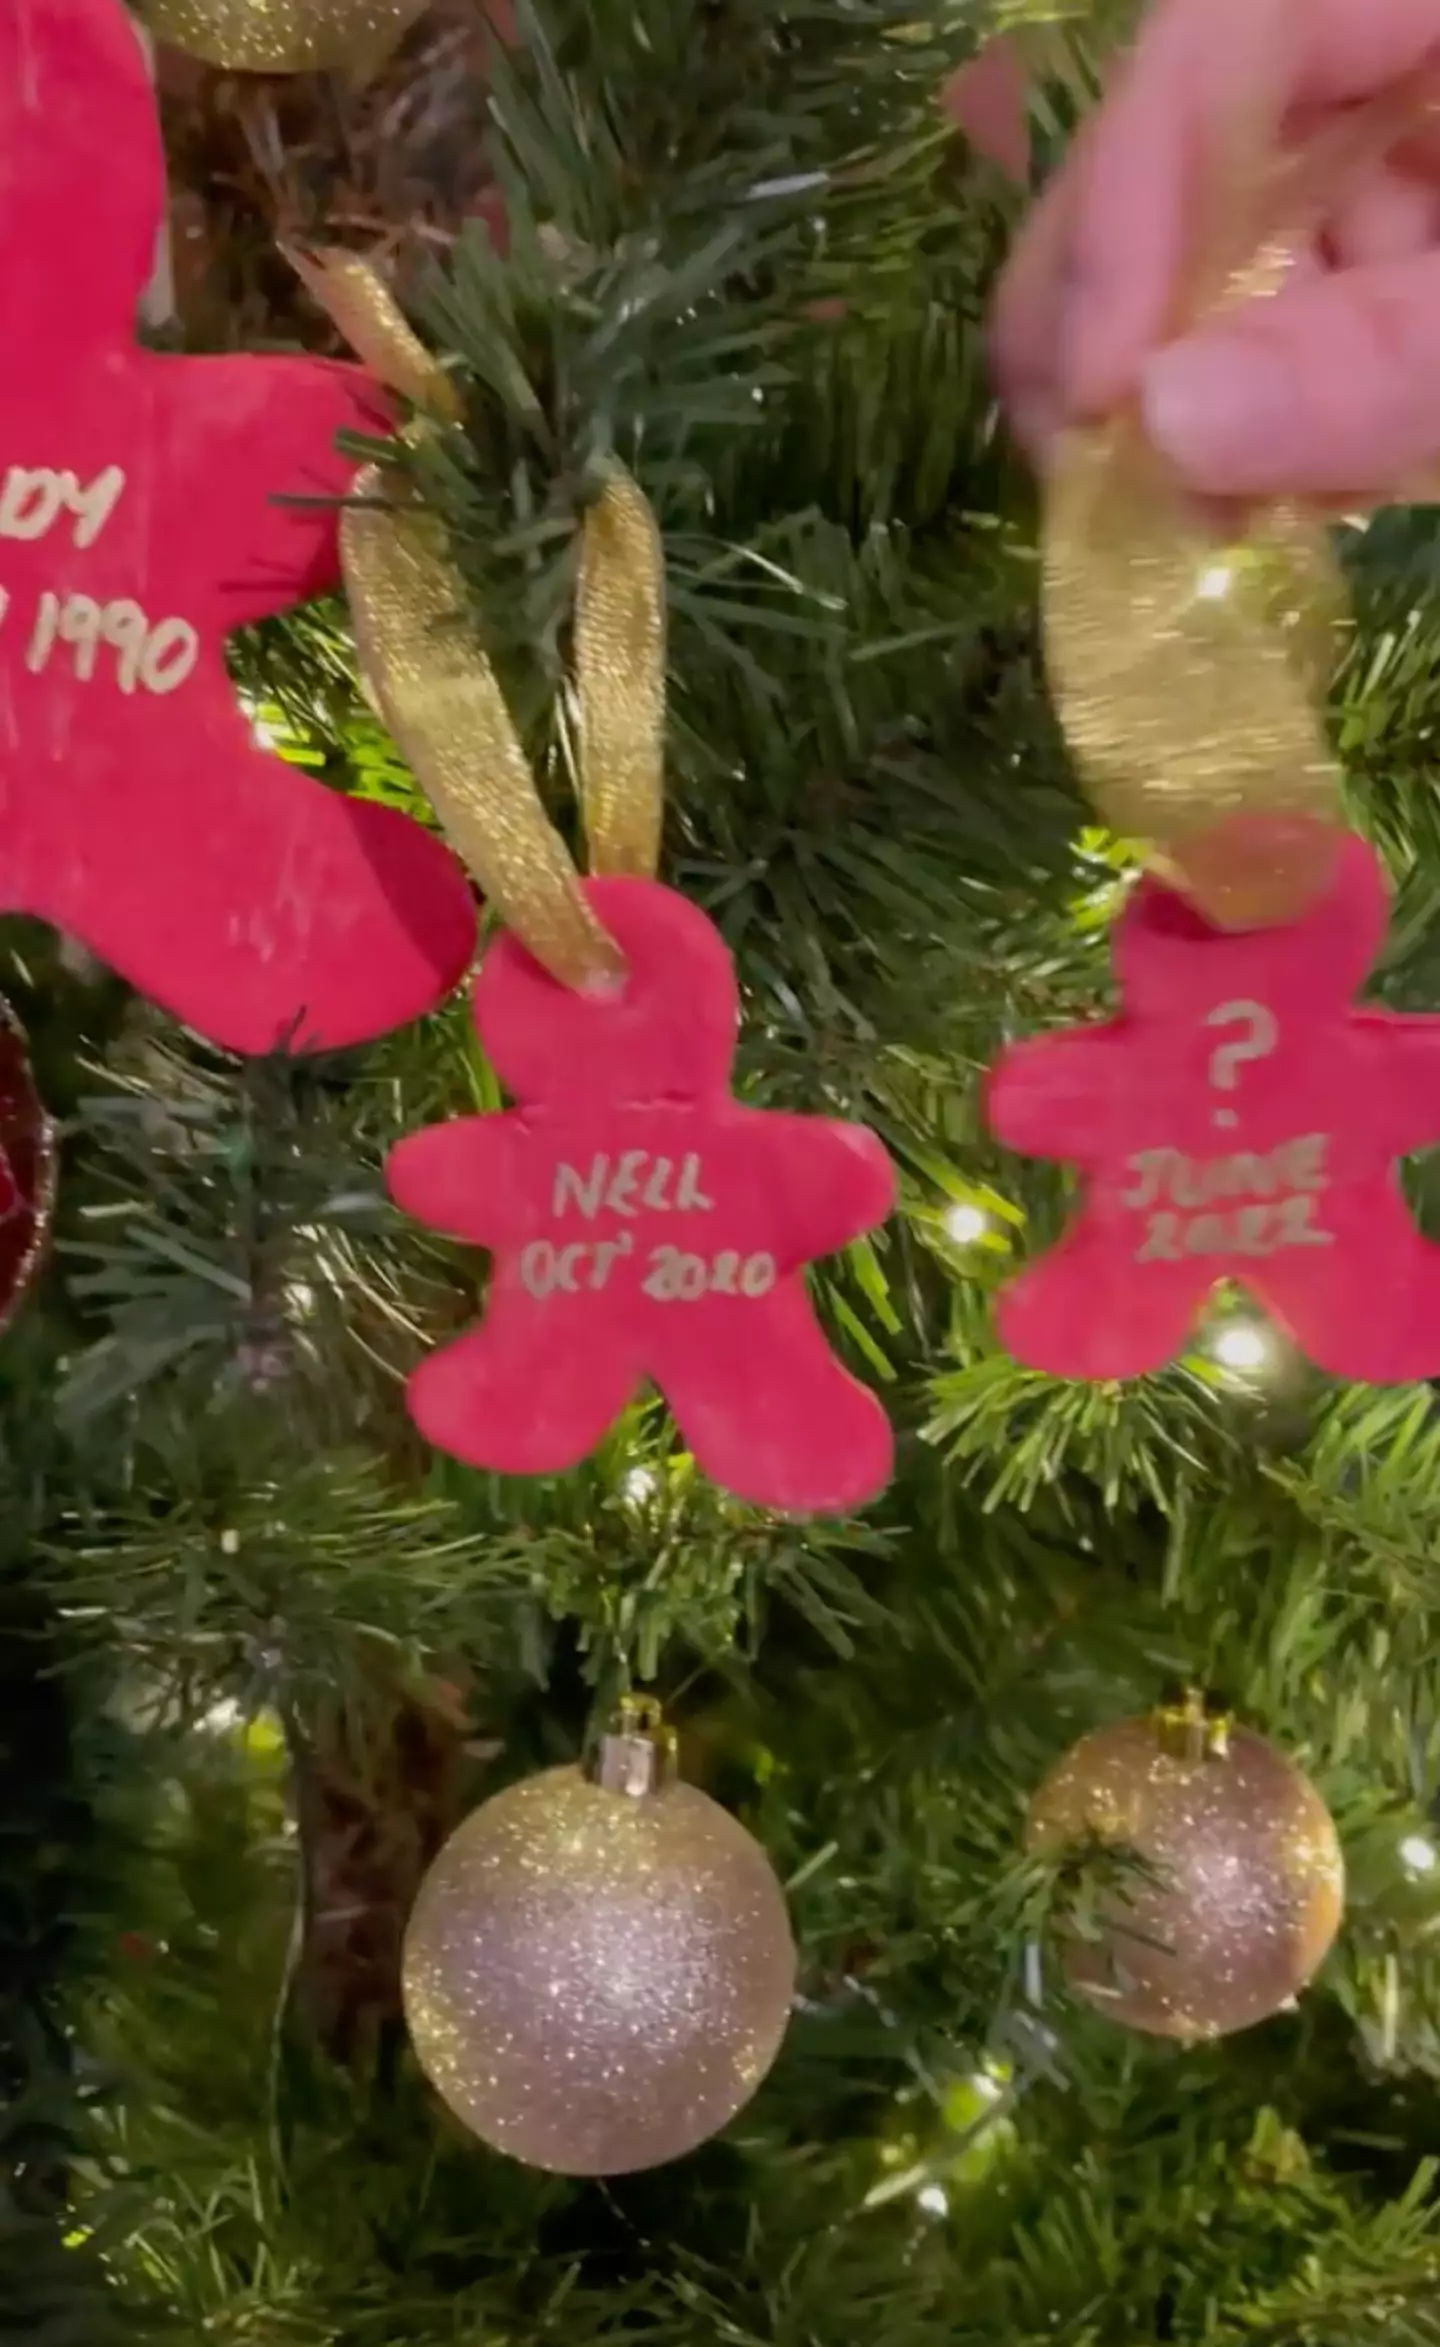 In the adorable clip, the family can be seen making homemade Christmas decorations for their tree (